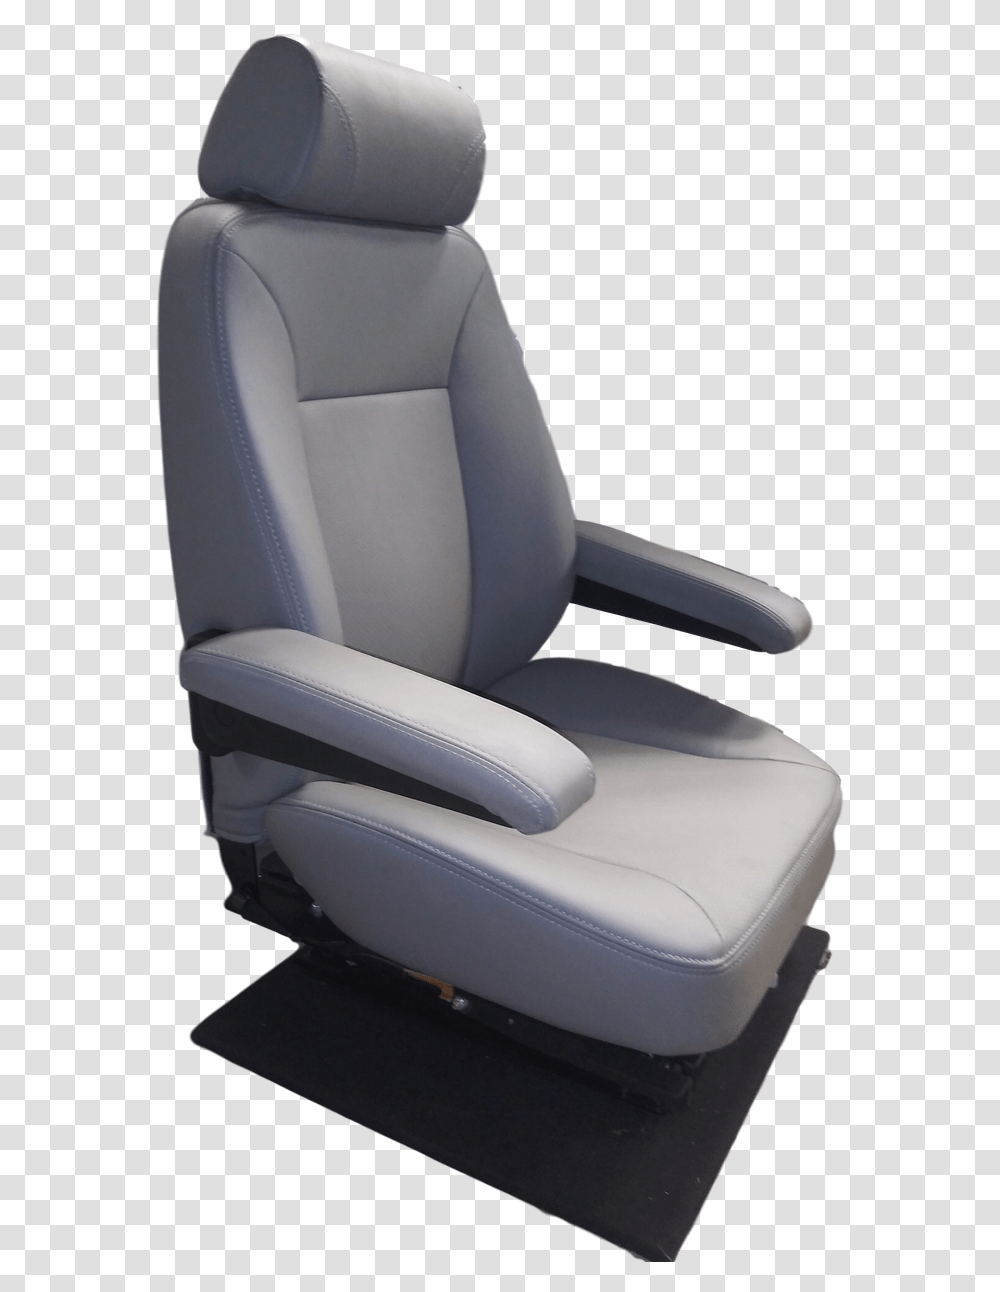 Lowrider Recliner 5178598 Vippng Car Seat, Chair, Furniture, Cushion, Armchair Transparent Png